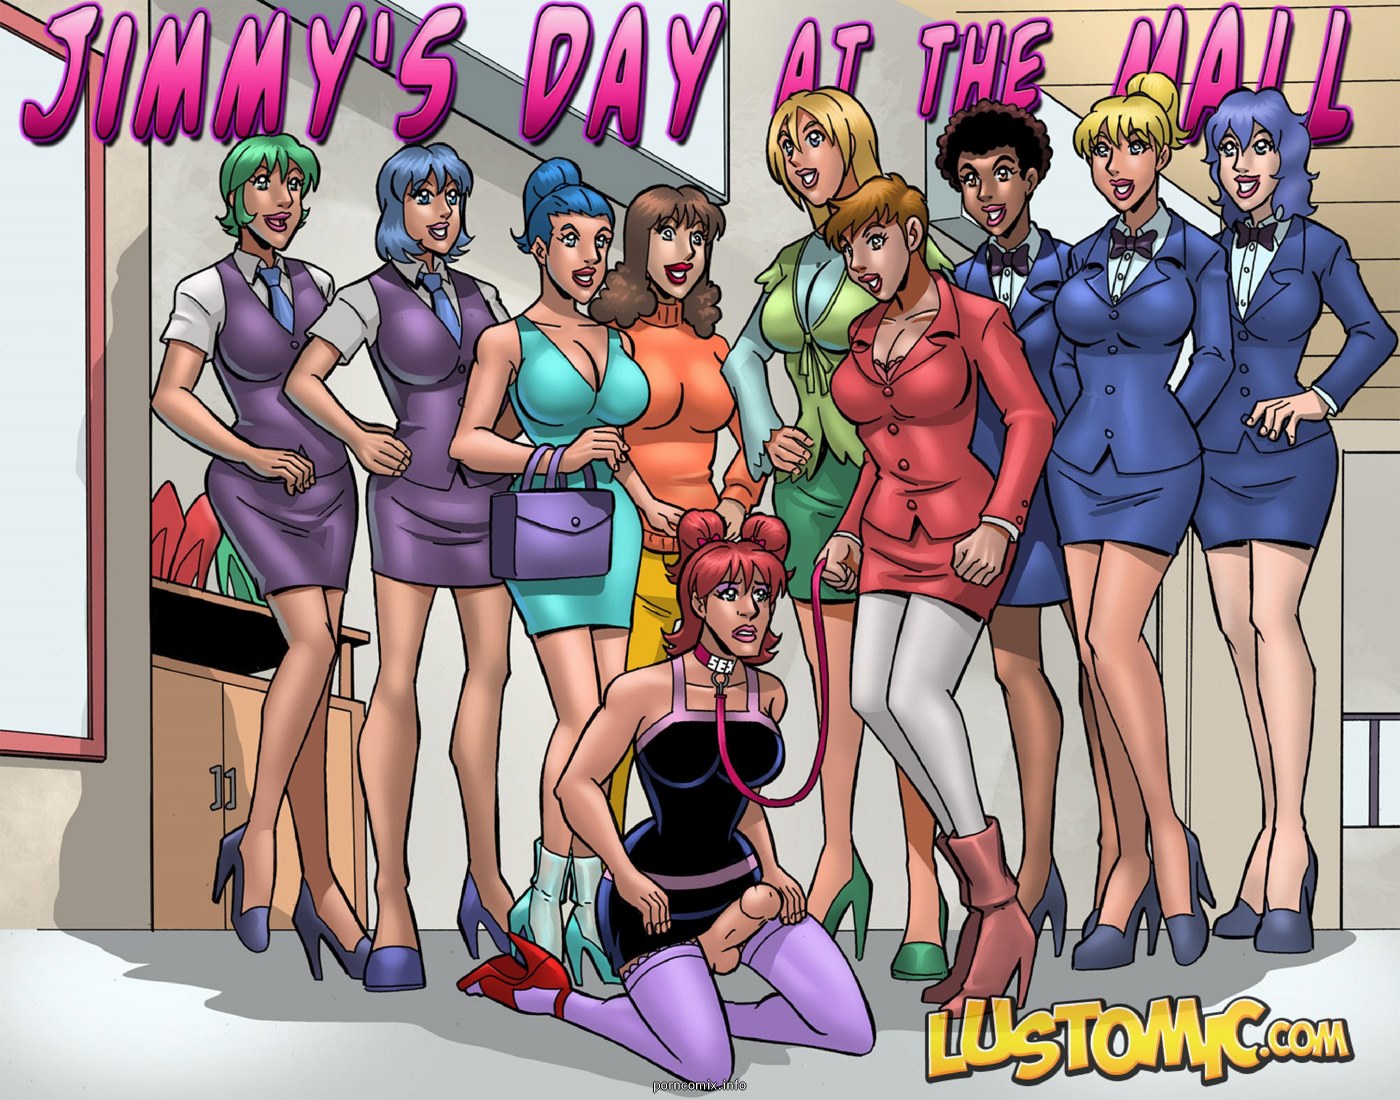 A day at the mall porn comic